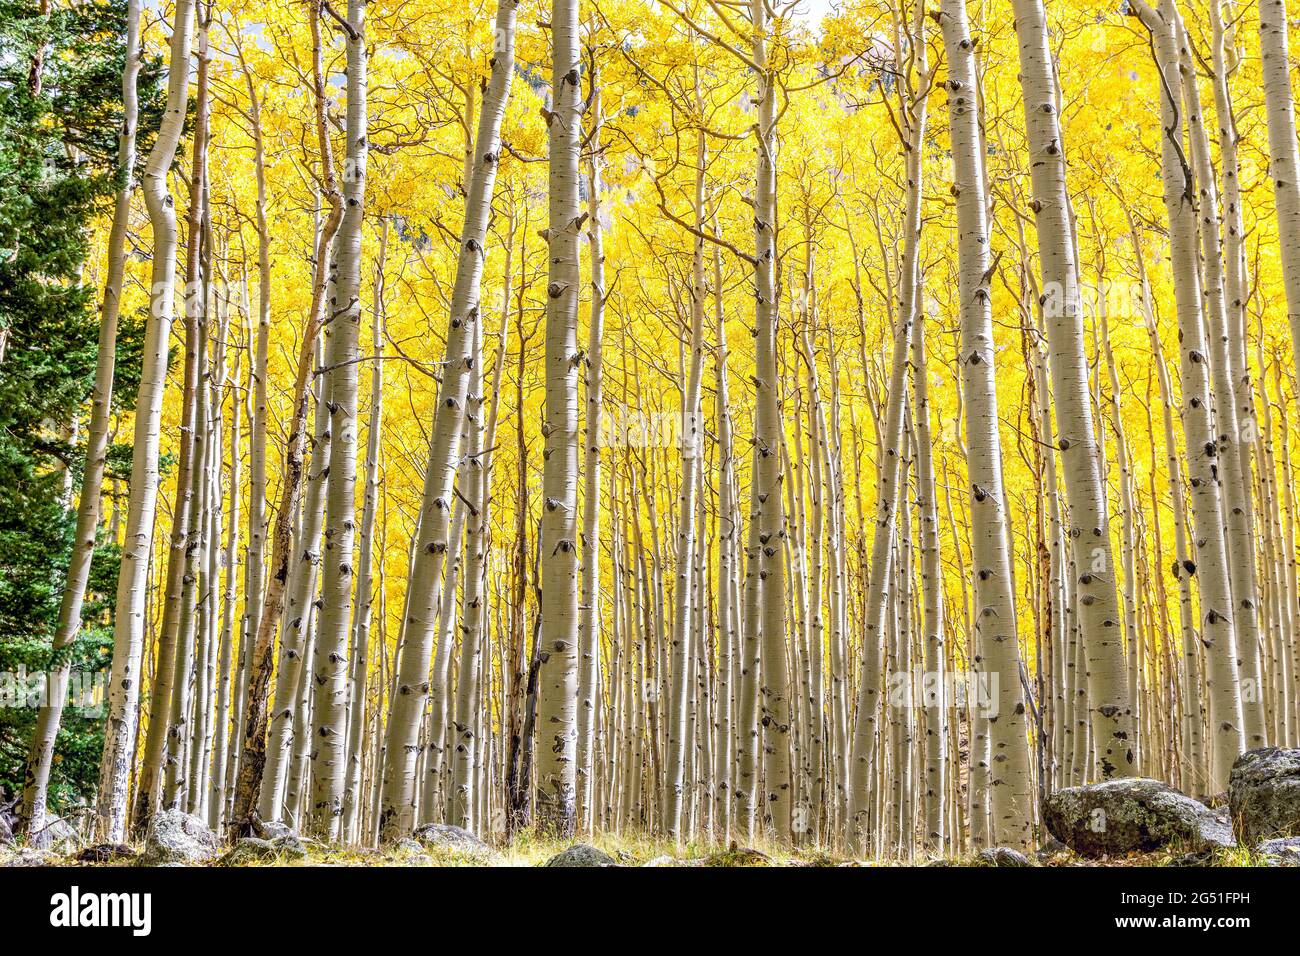 Aspen grove hiking trail in peak fall beauty with gold yellow leaves in Flagstaff, Arizona. Aspen forest changing leaves in backlight. Stock Photo